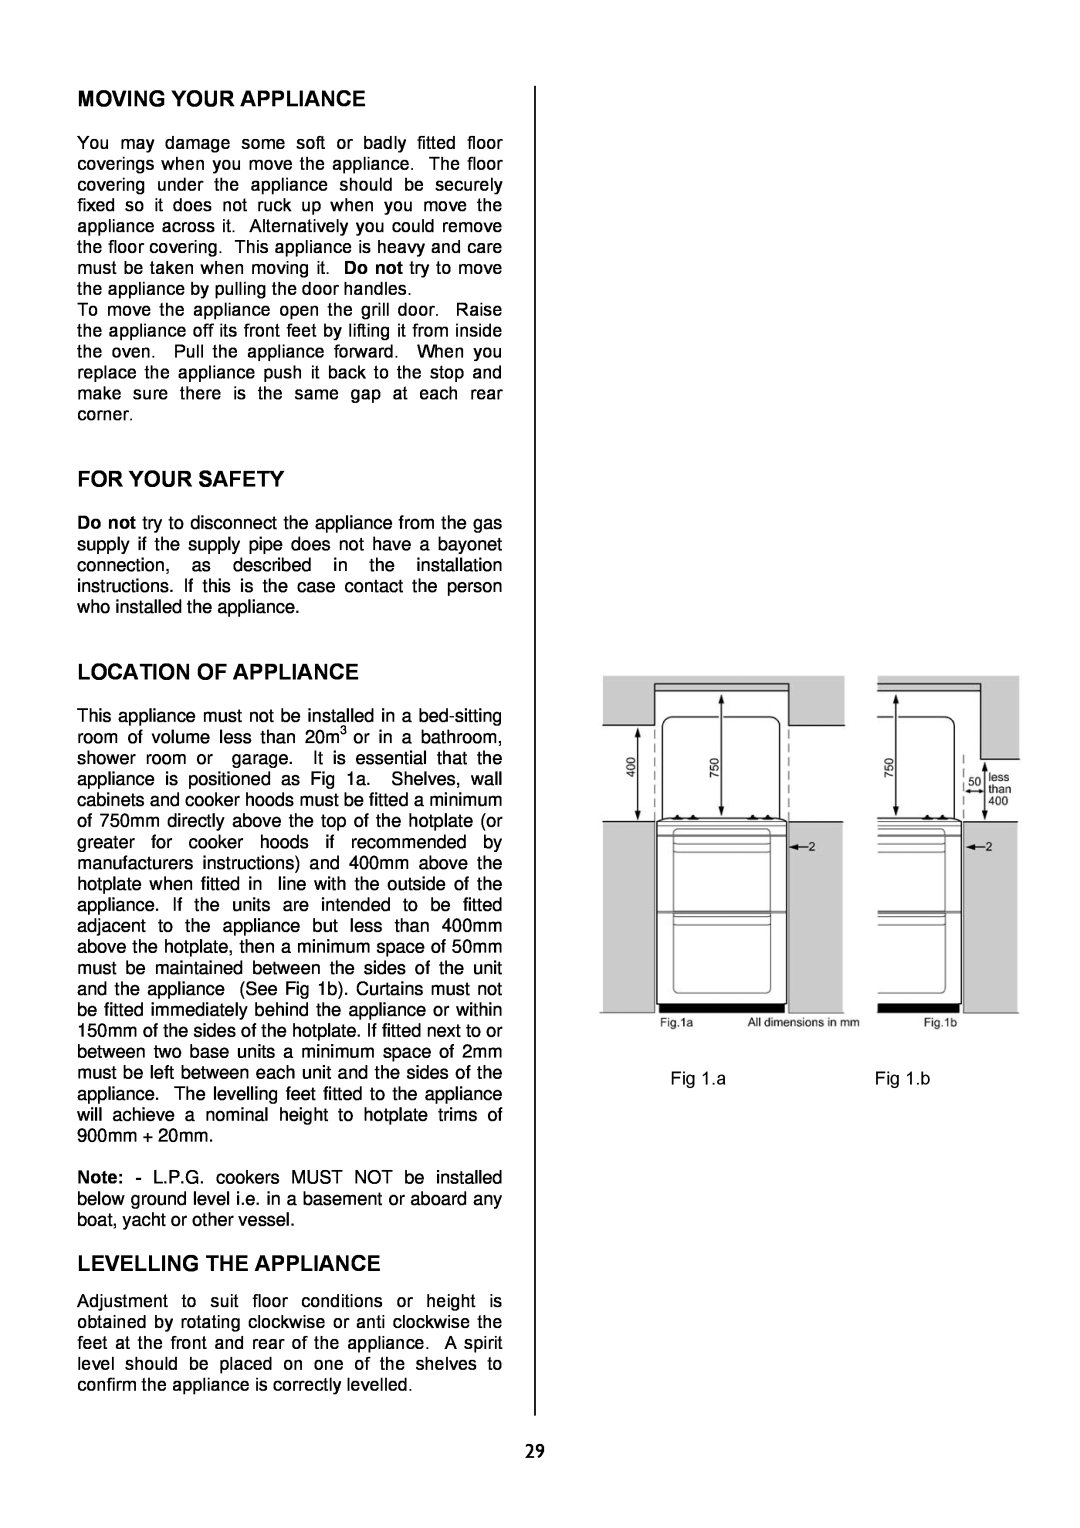 Electrolux EKG5046, EKG5047 manual Moving Your Appliance, For Your Safety, Location Of Appliance, Levelling The Appliance 